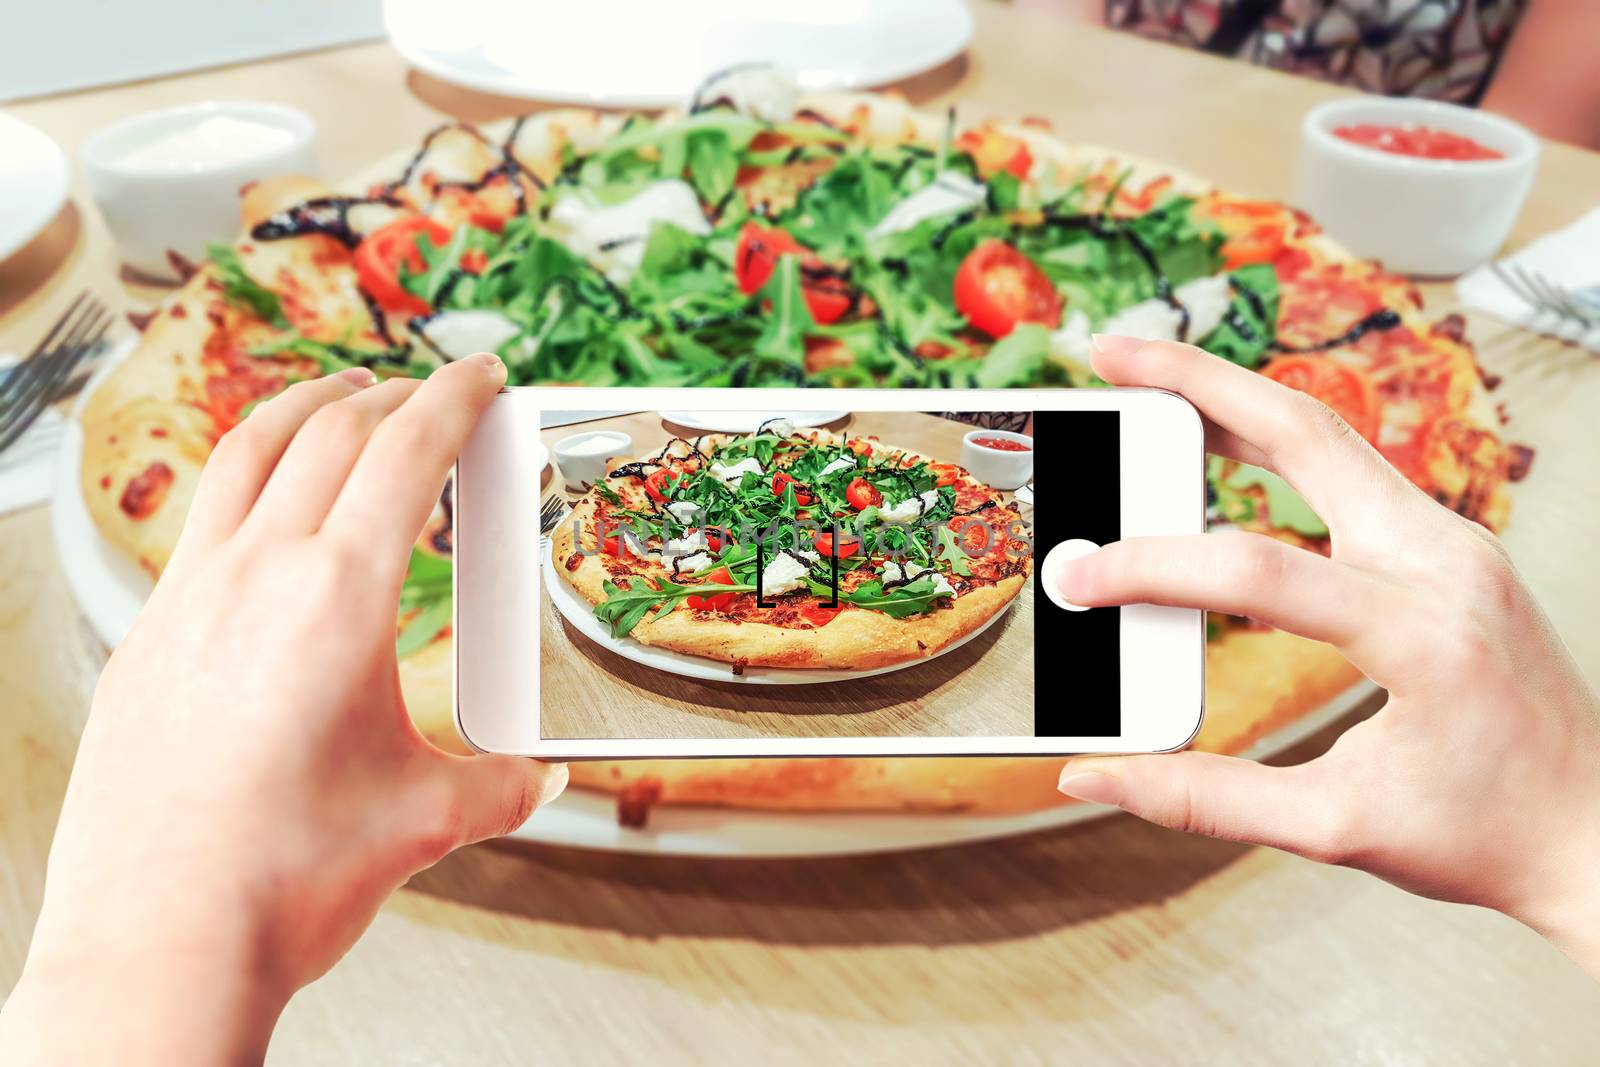 Making pizza photos on smartphone by wdnet_studio